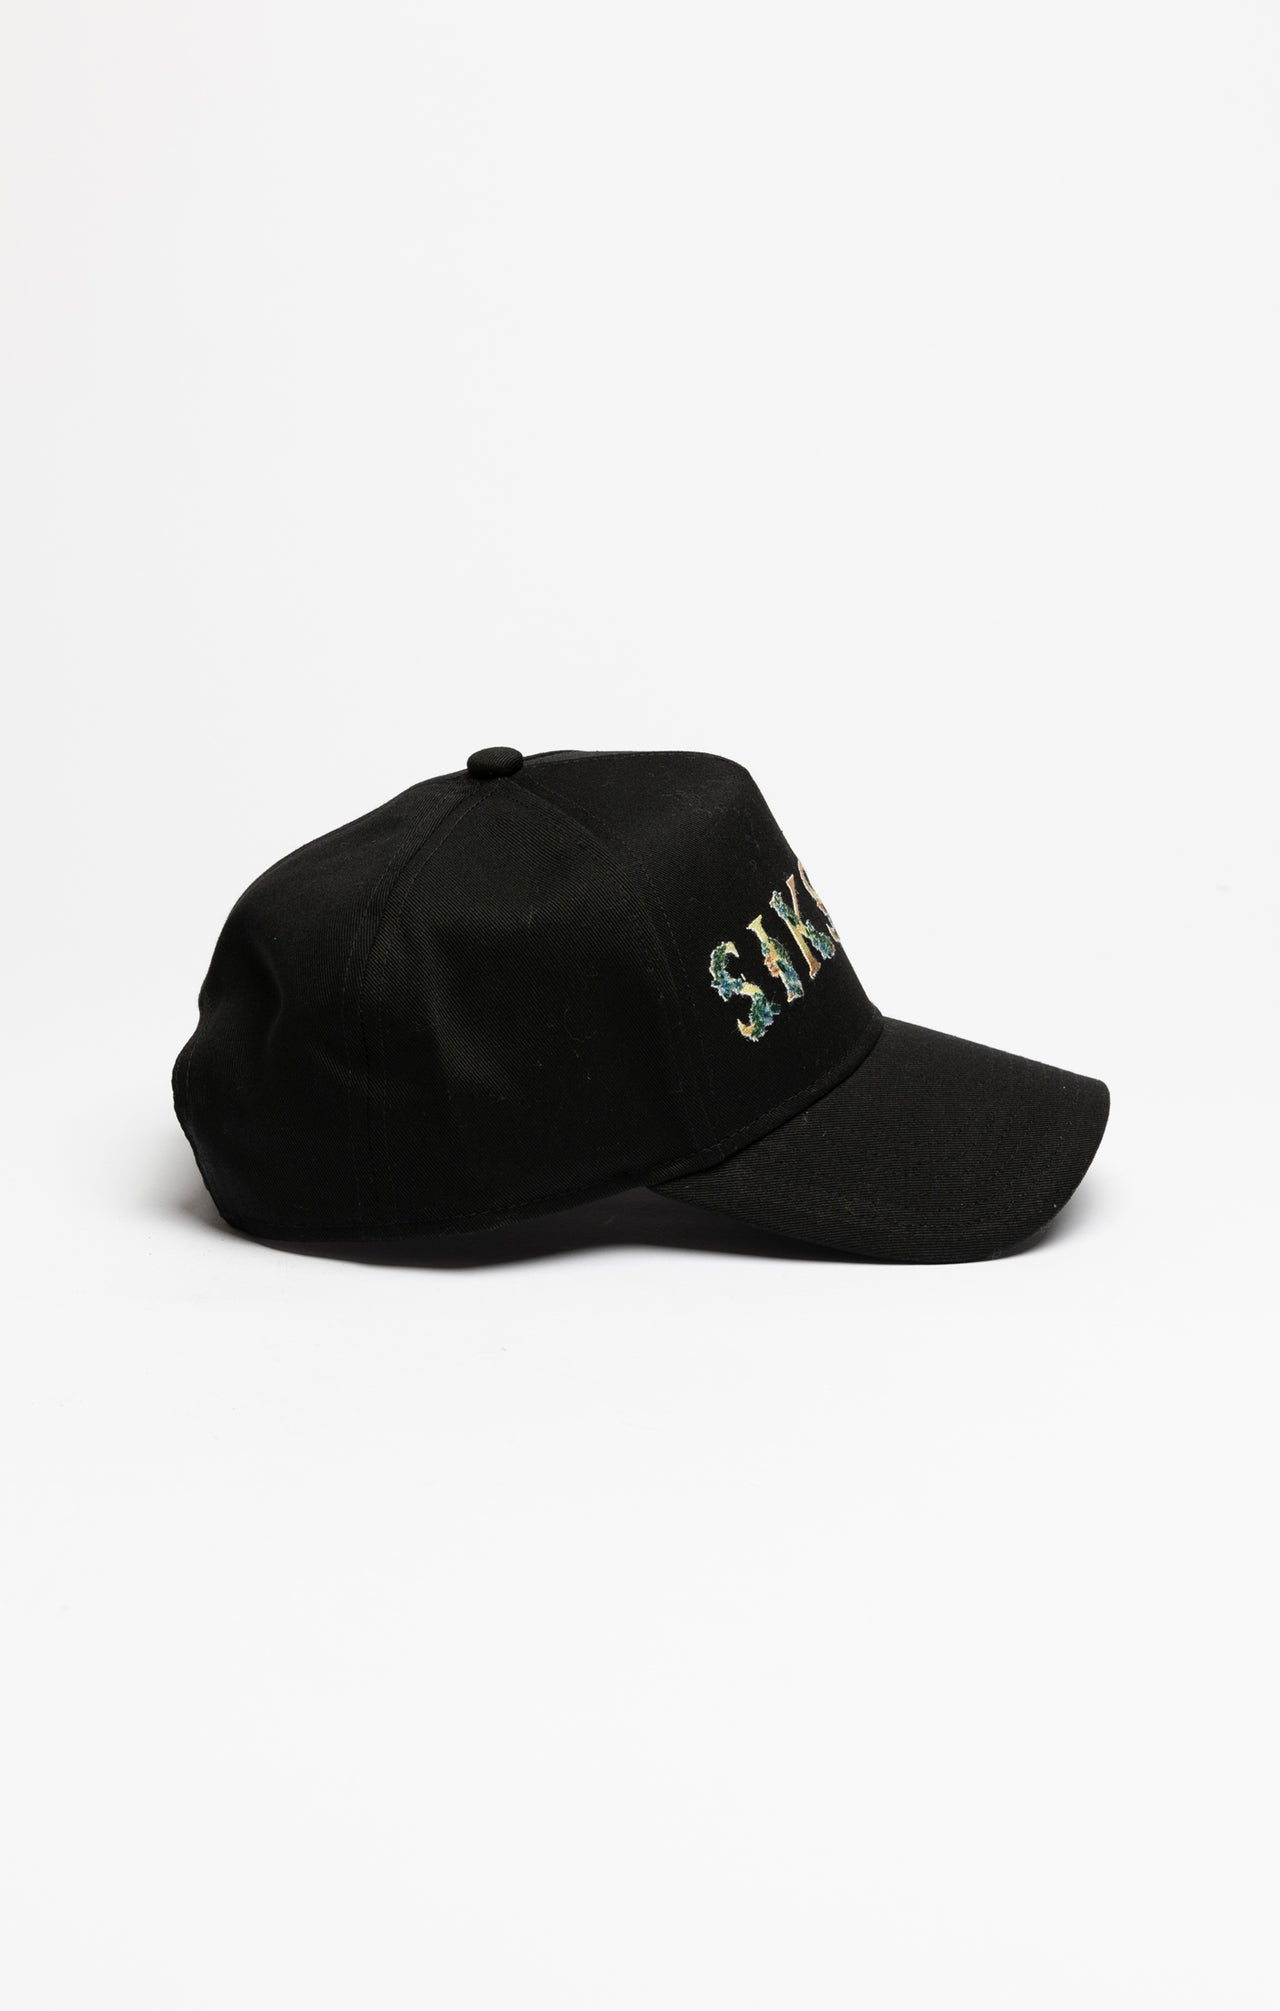 Black Floral Embroidery Trucker Cap (1)